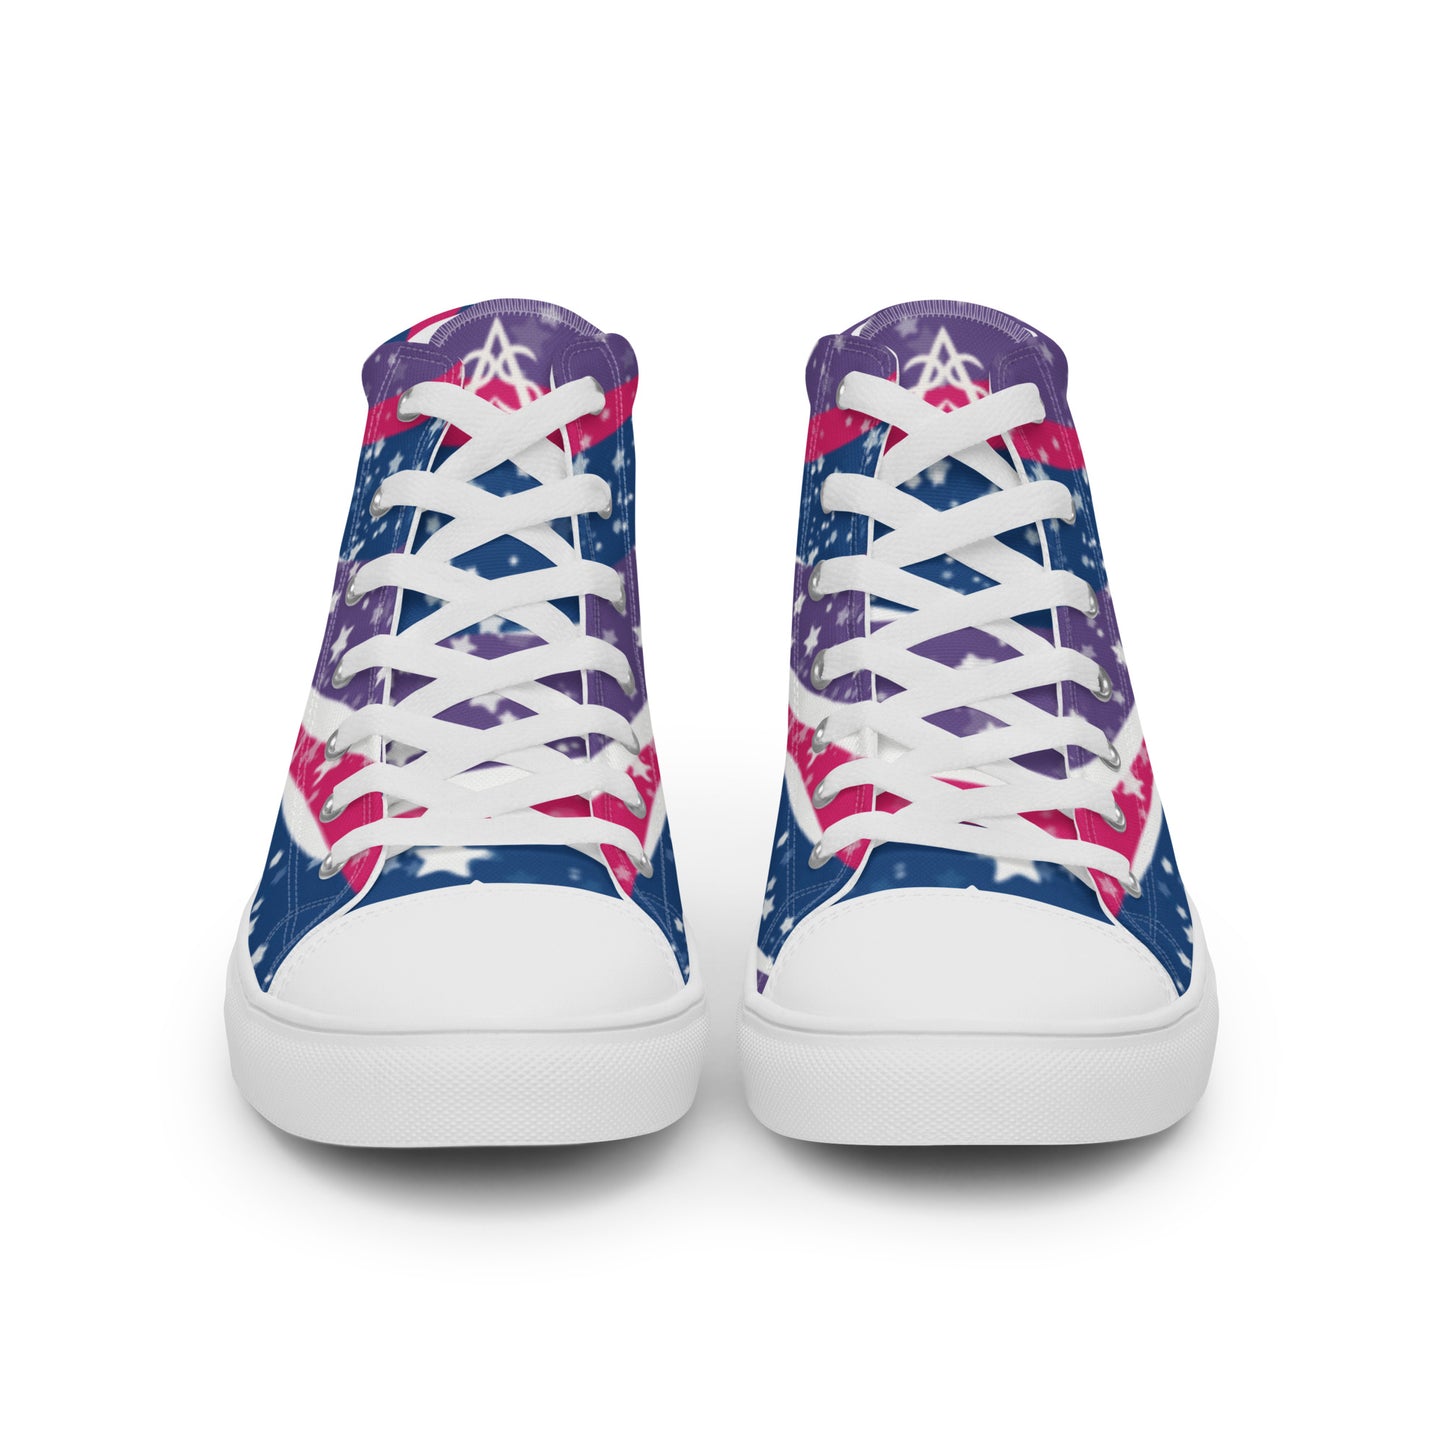 Front view: a pair of high top shoes with pink, purple, and blue ribbons that get larger from heel to laces, white stars, and the Aras Sivad logo on the tongue.